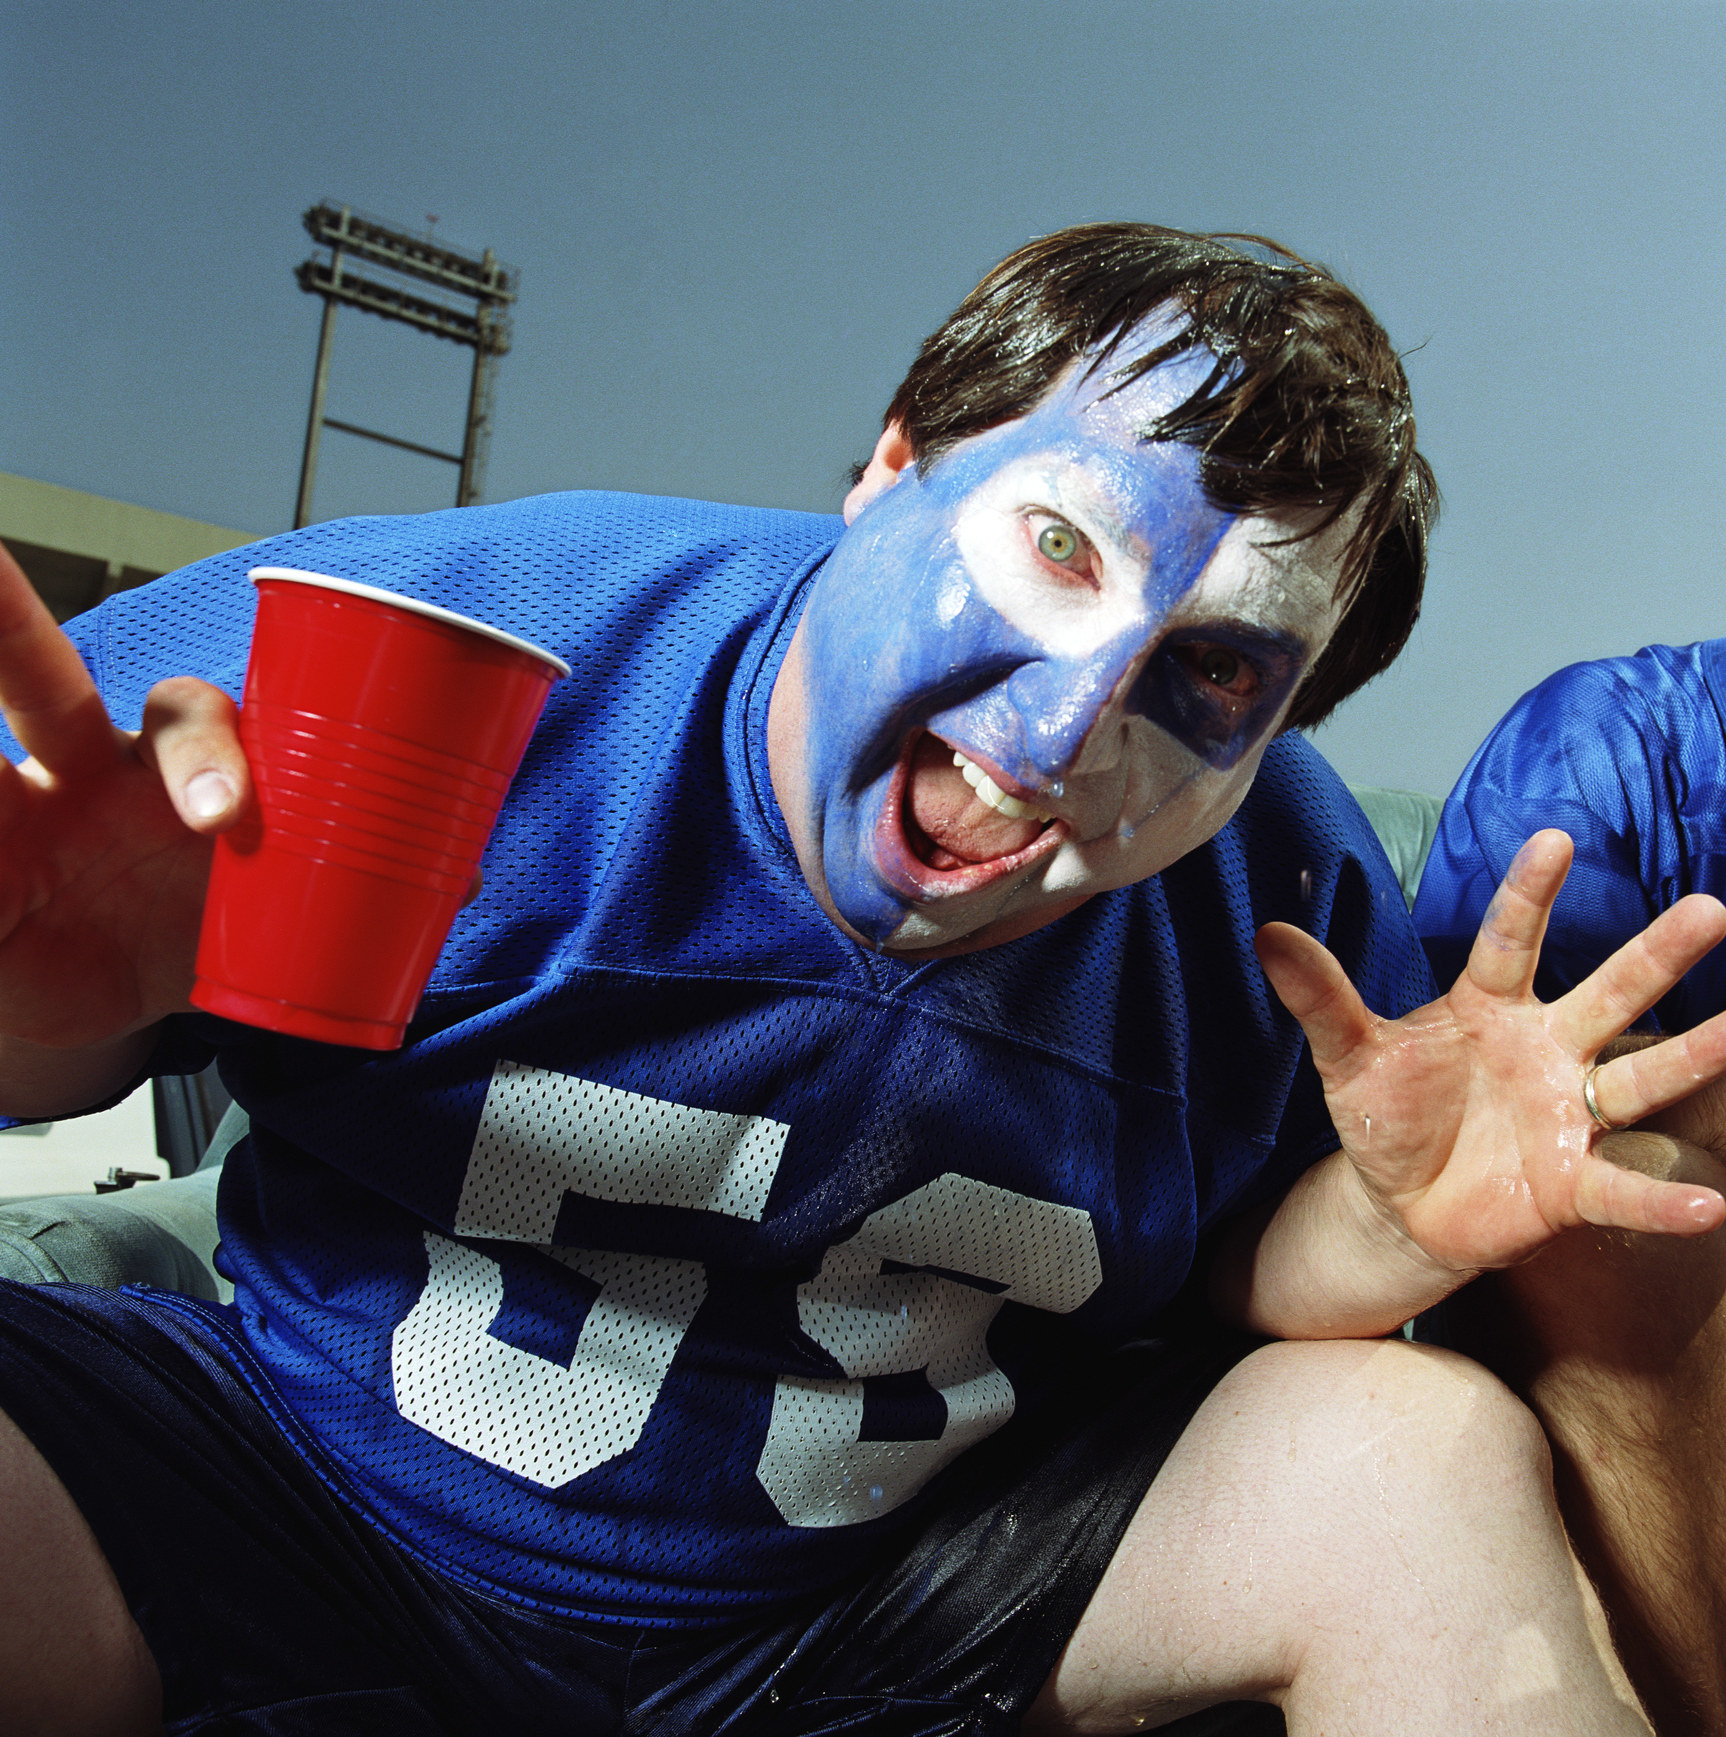 Sports fan with face paint and jersey and holding a red cup